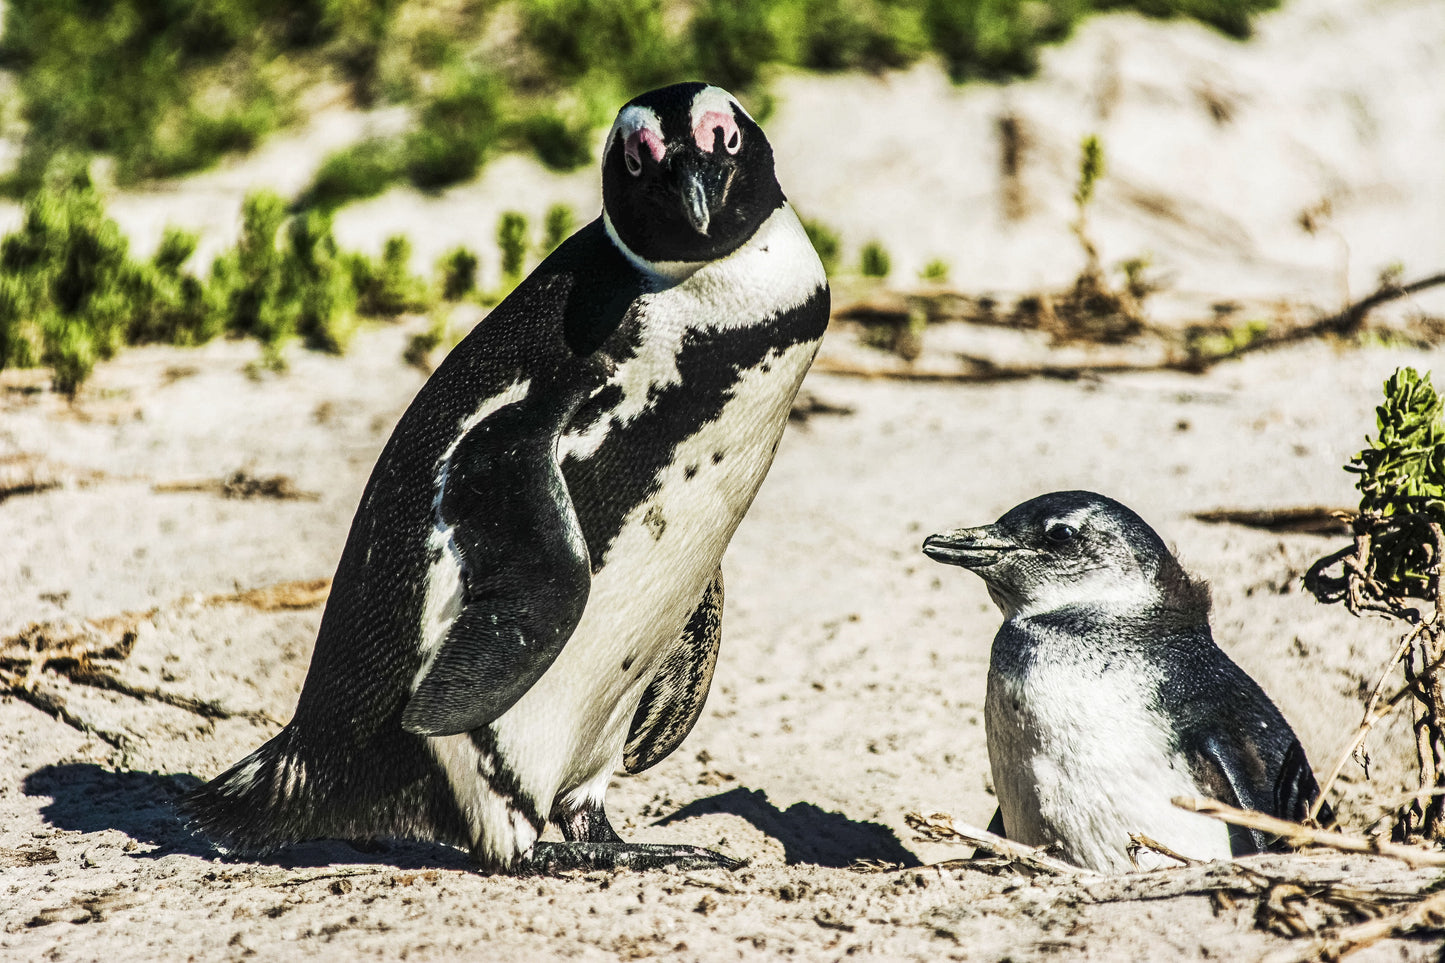 Alessandra Mattanza | CARING, Cape Peninsula, South Africa. African penguins on Boulders Beach, South Africa. Available as an art print or as a photographic print on acrylic glass.